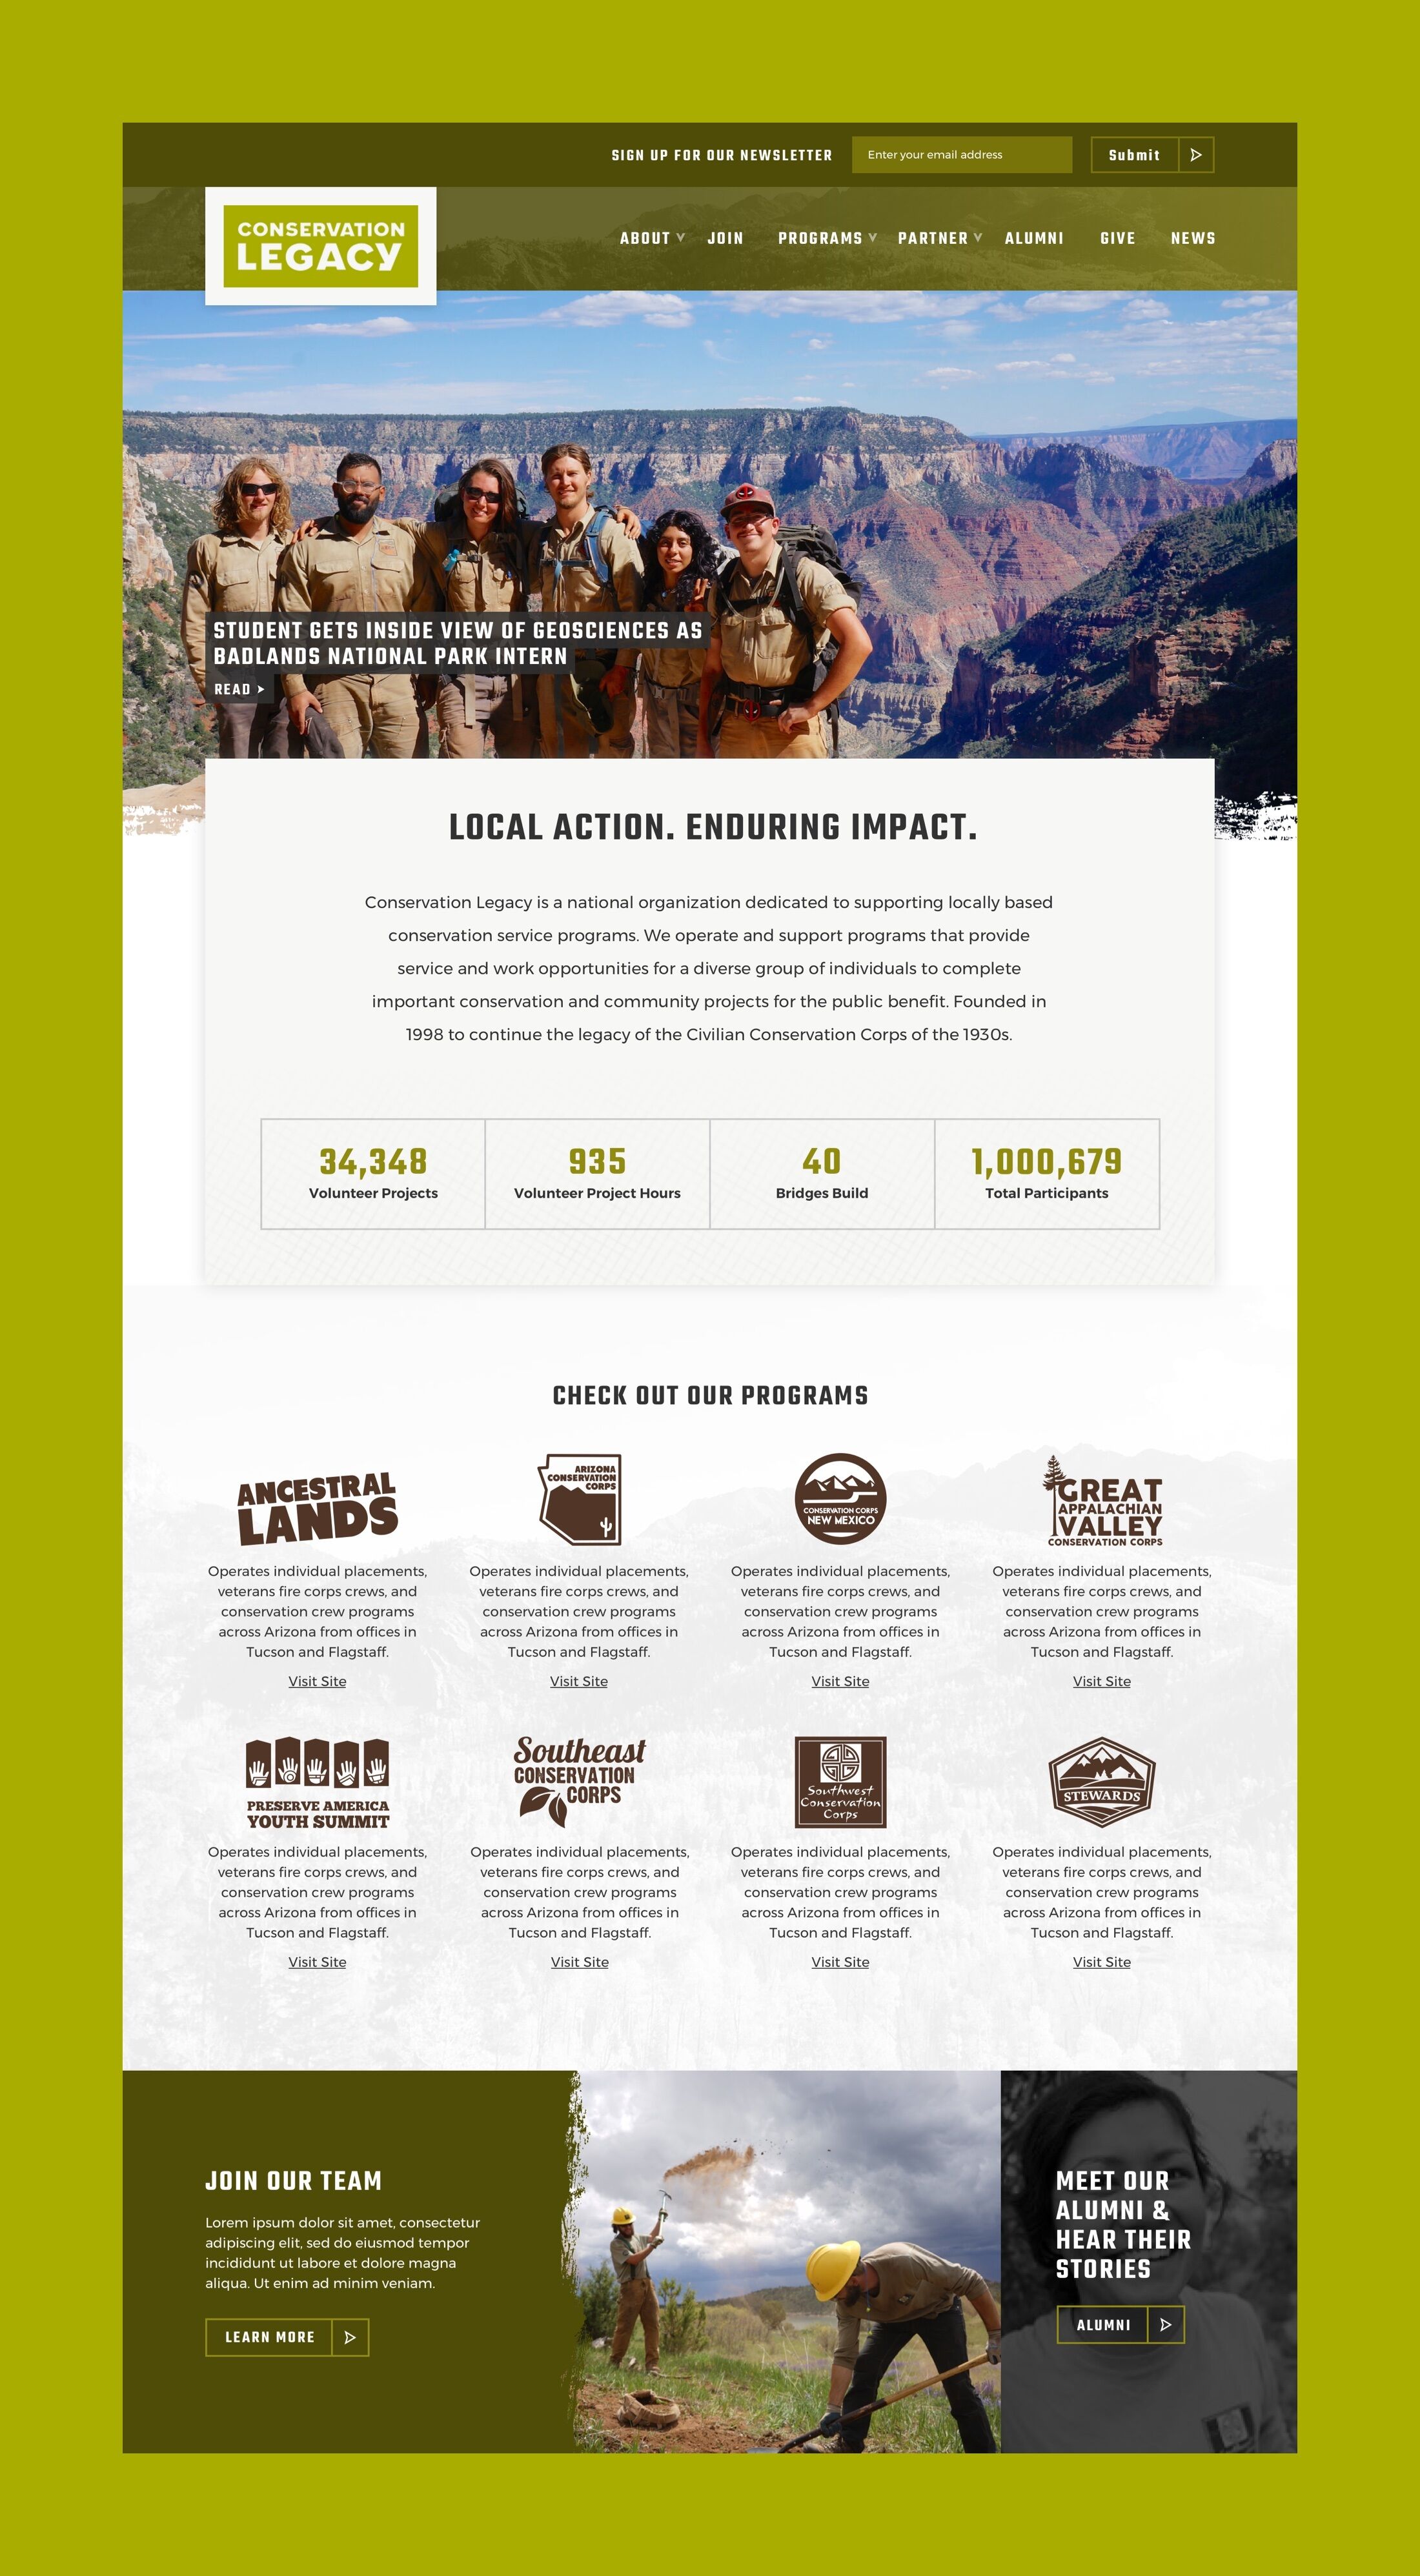 Full view of the Conservation Legacy homepage